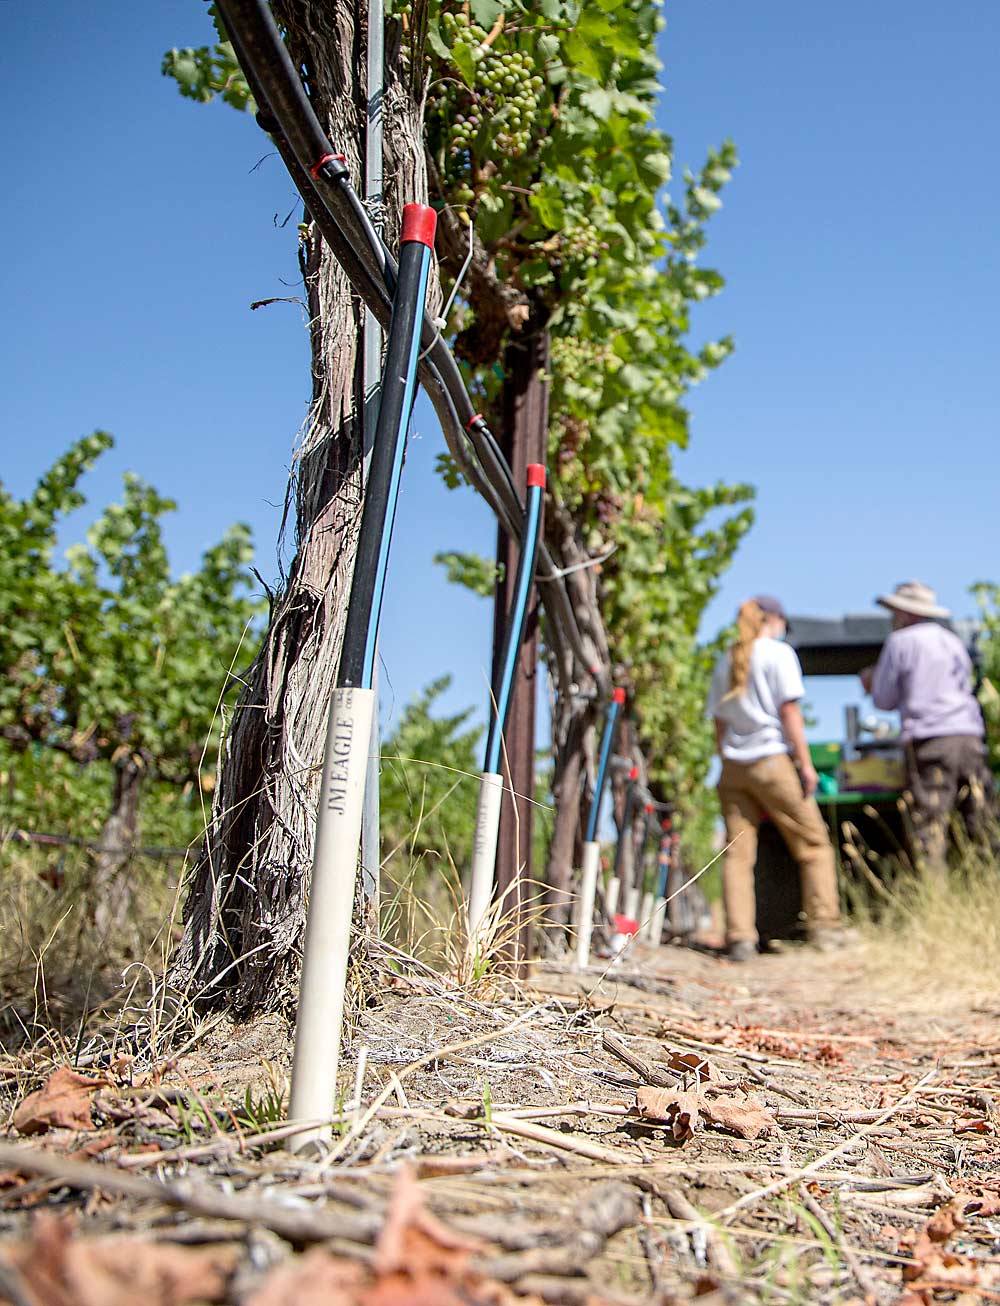 Jacoby’s subsurface method of using pipes and tape to deliver water directly to underground roots is so simple that WSU’s Office of Commercialization declined to pursue a patent. (Ross Courtney/Good Fruit Grower)